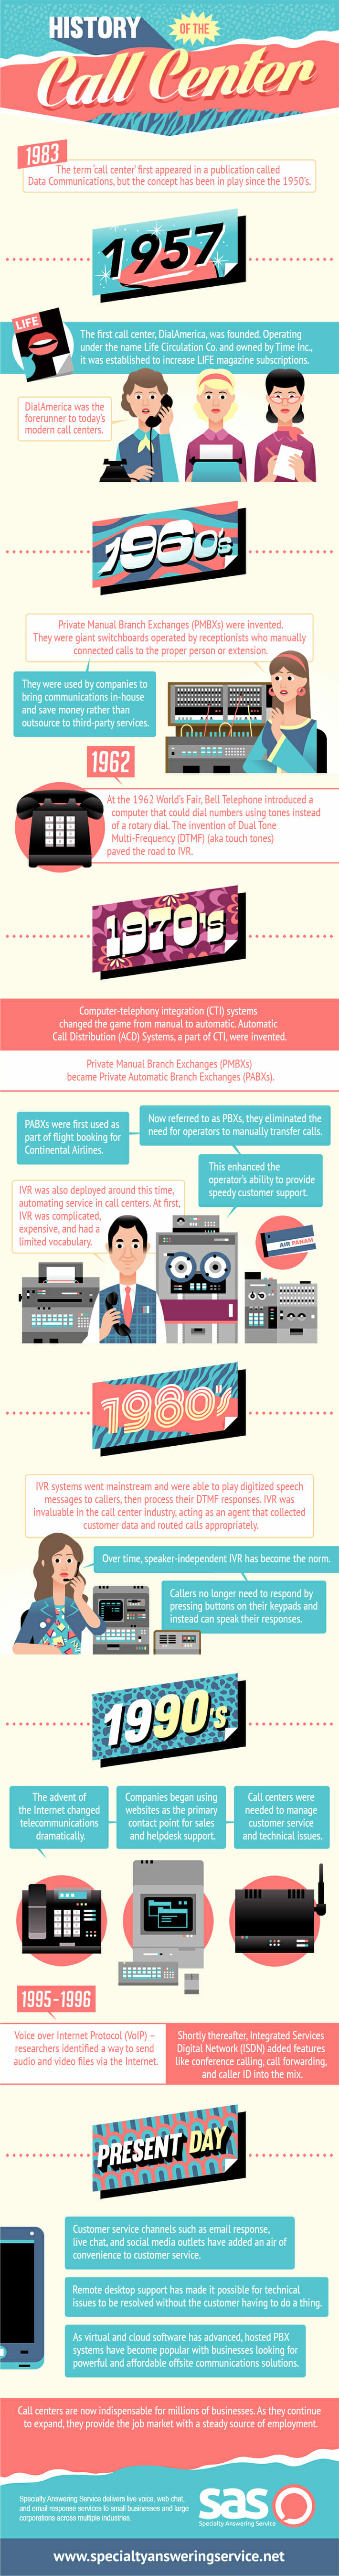 Call Center History Infographic